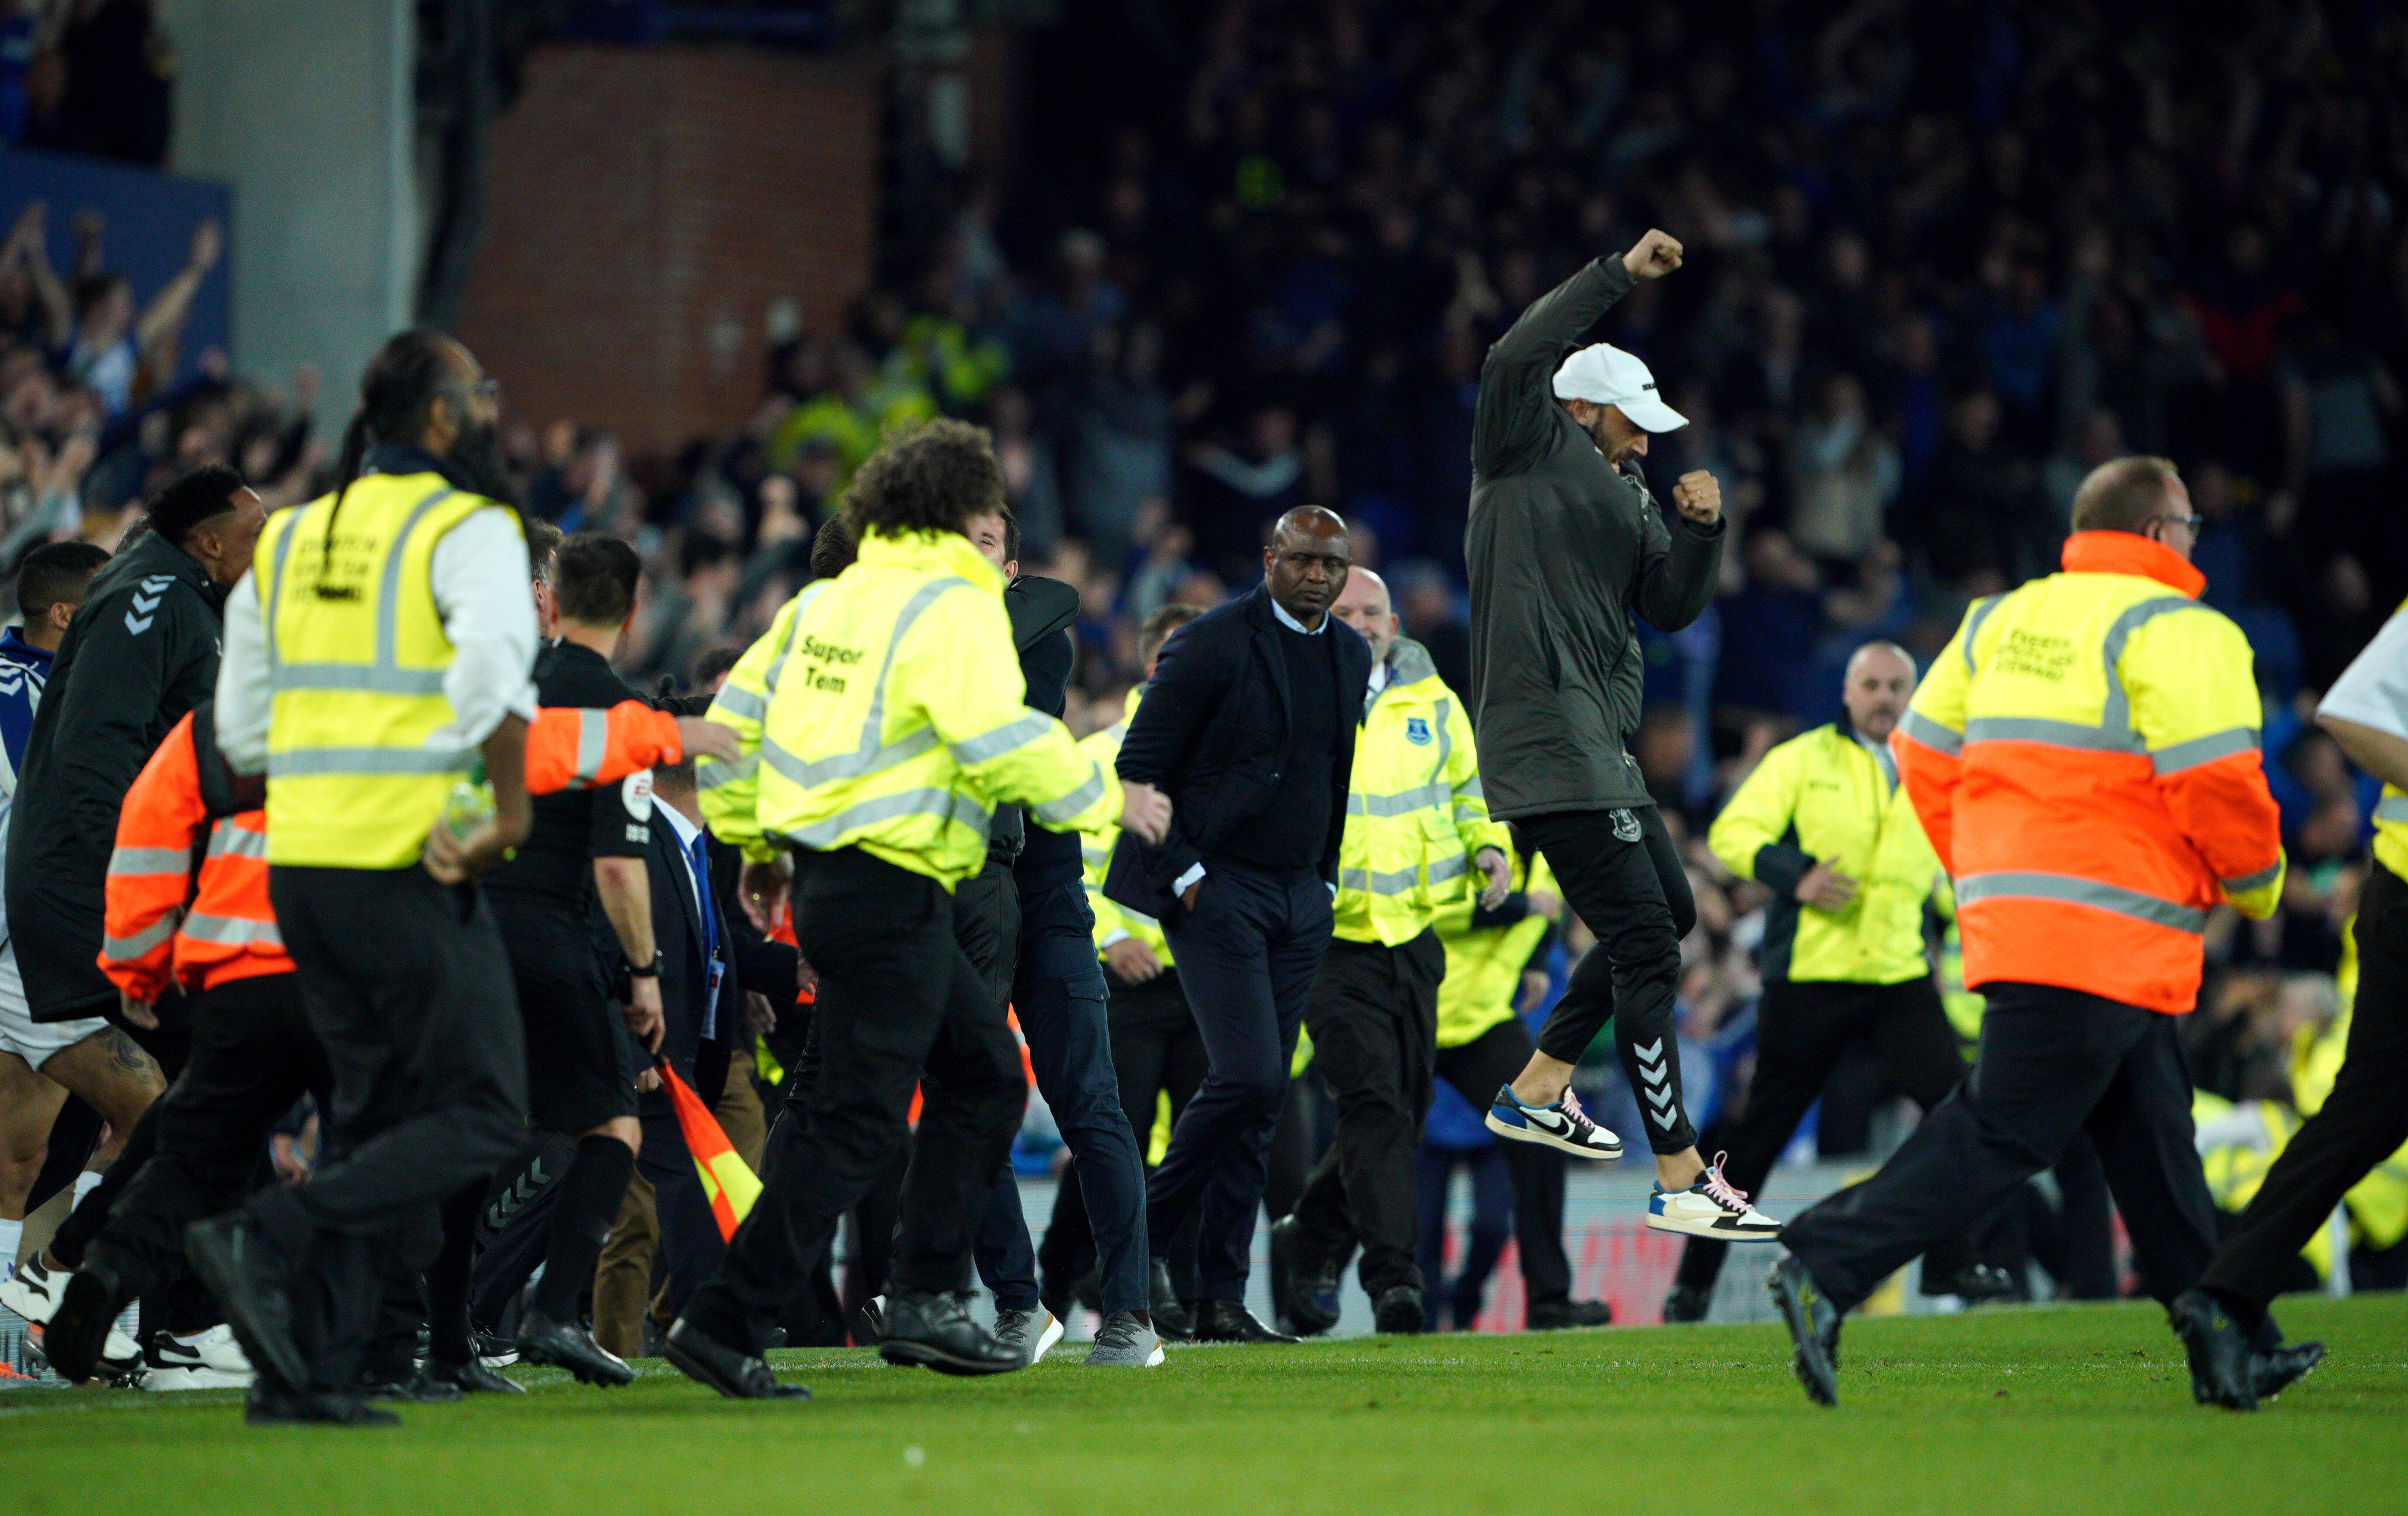 Crystal Palace manager Patrick Vieira pictured (center) at Goodison Park before thousands of Everton fans rushed the field after their side's 3-2 win in May 2022